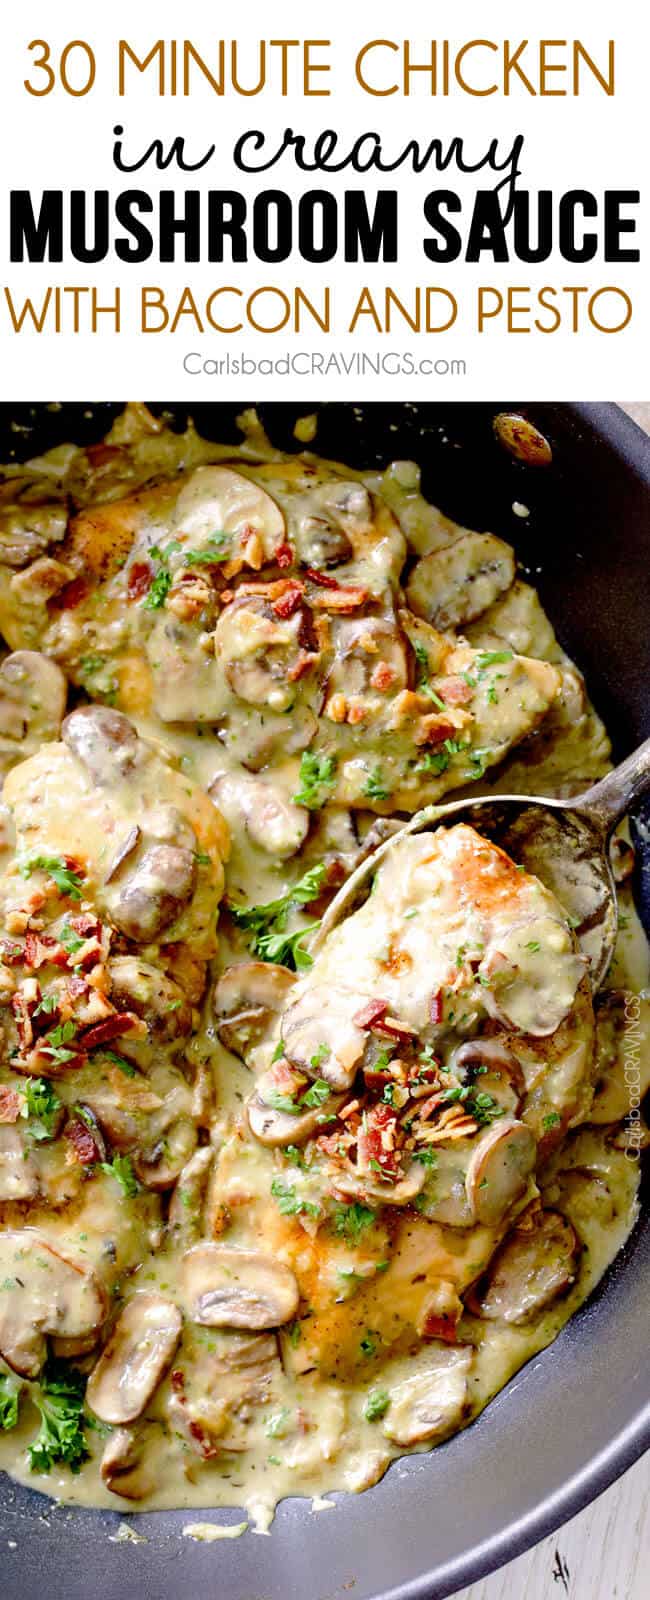 30 Minute Chicken in Creamy Mushroom Sauce with Bacon and Pesto is one of the easiest yet most delicious chicken dinners you will ever make! Love it with pasta, rice or potatoes, etc..